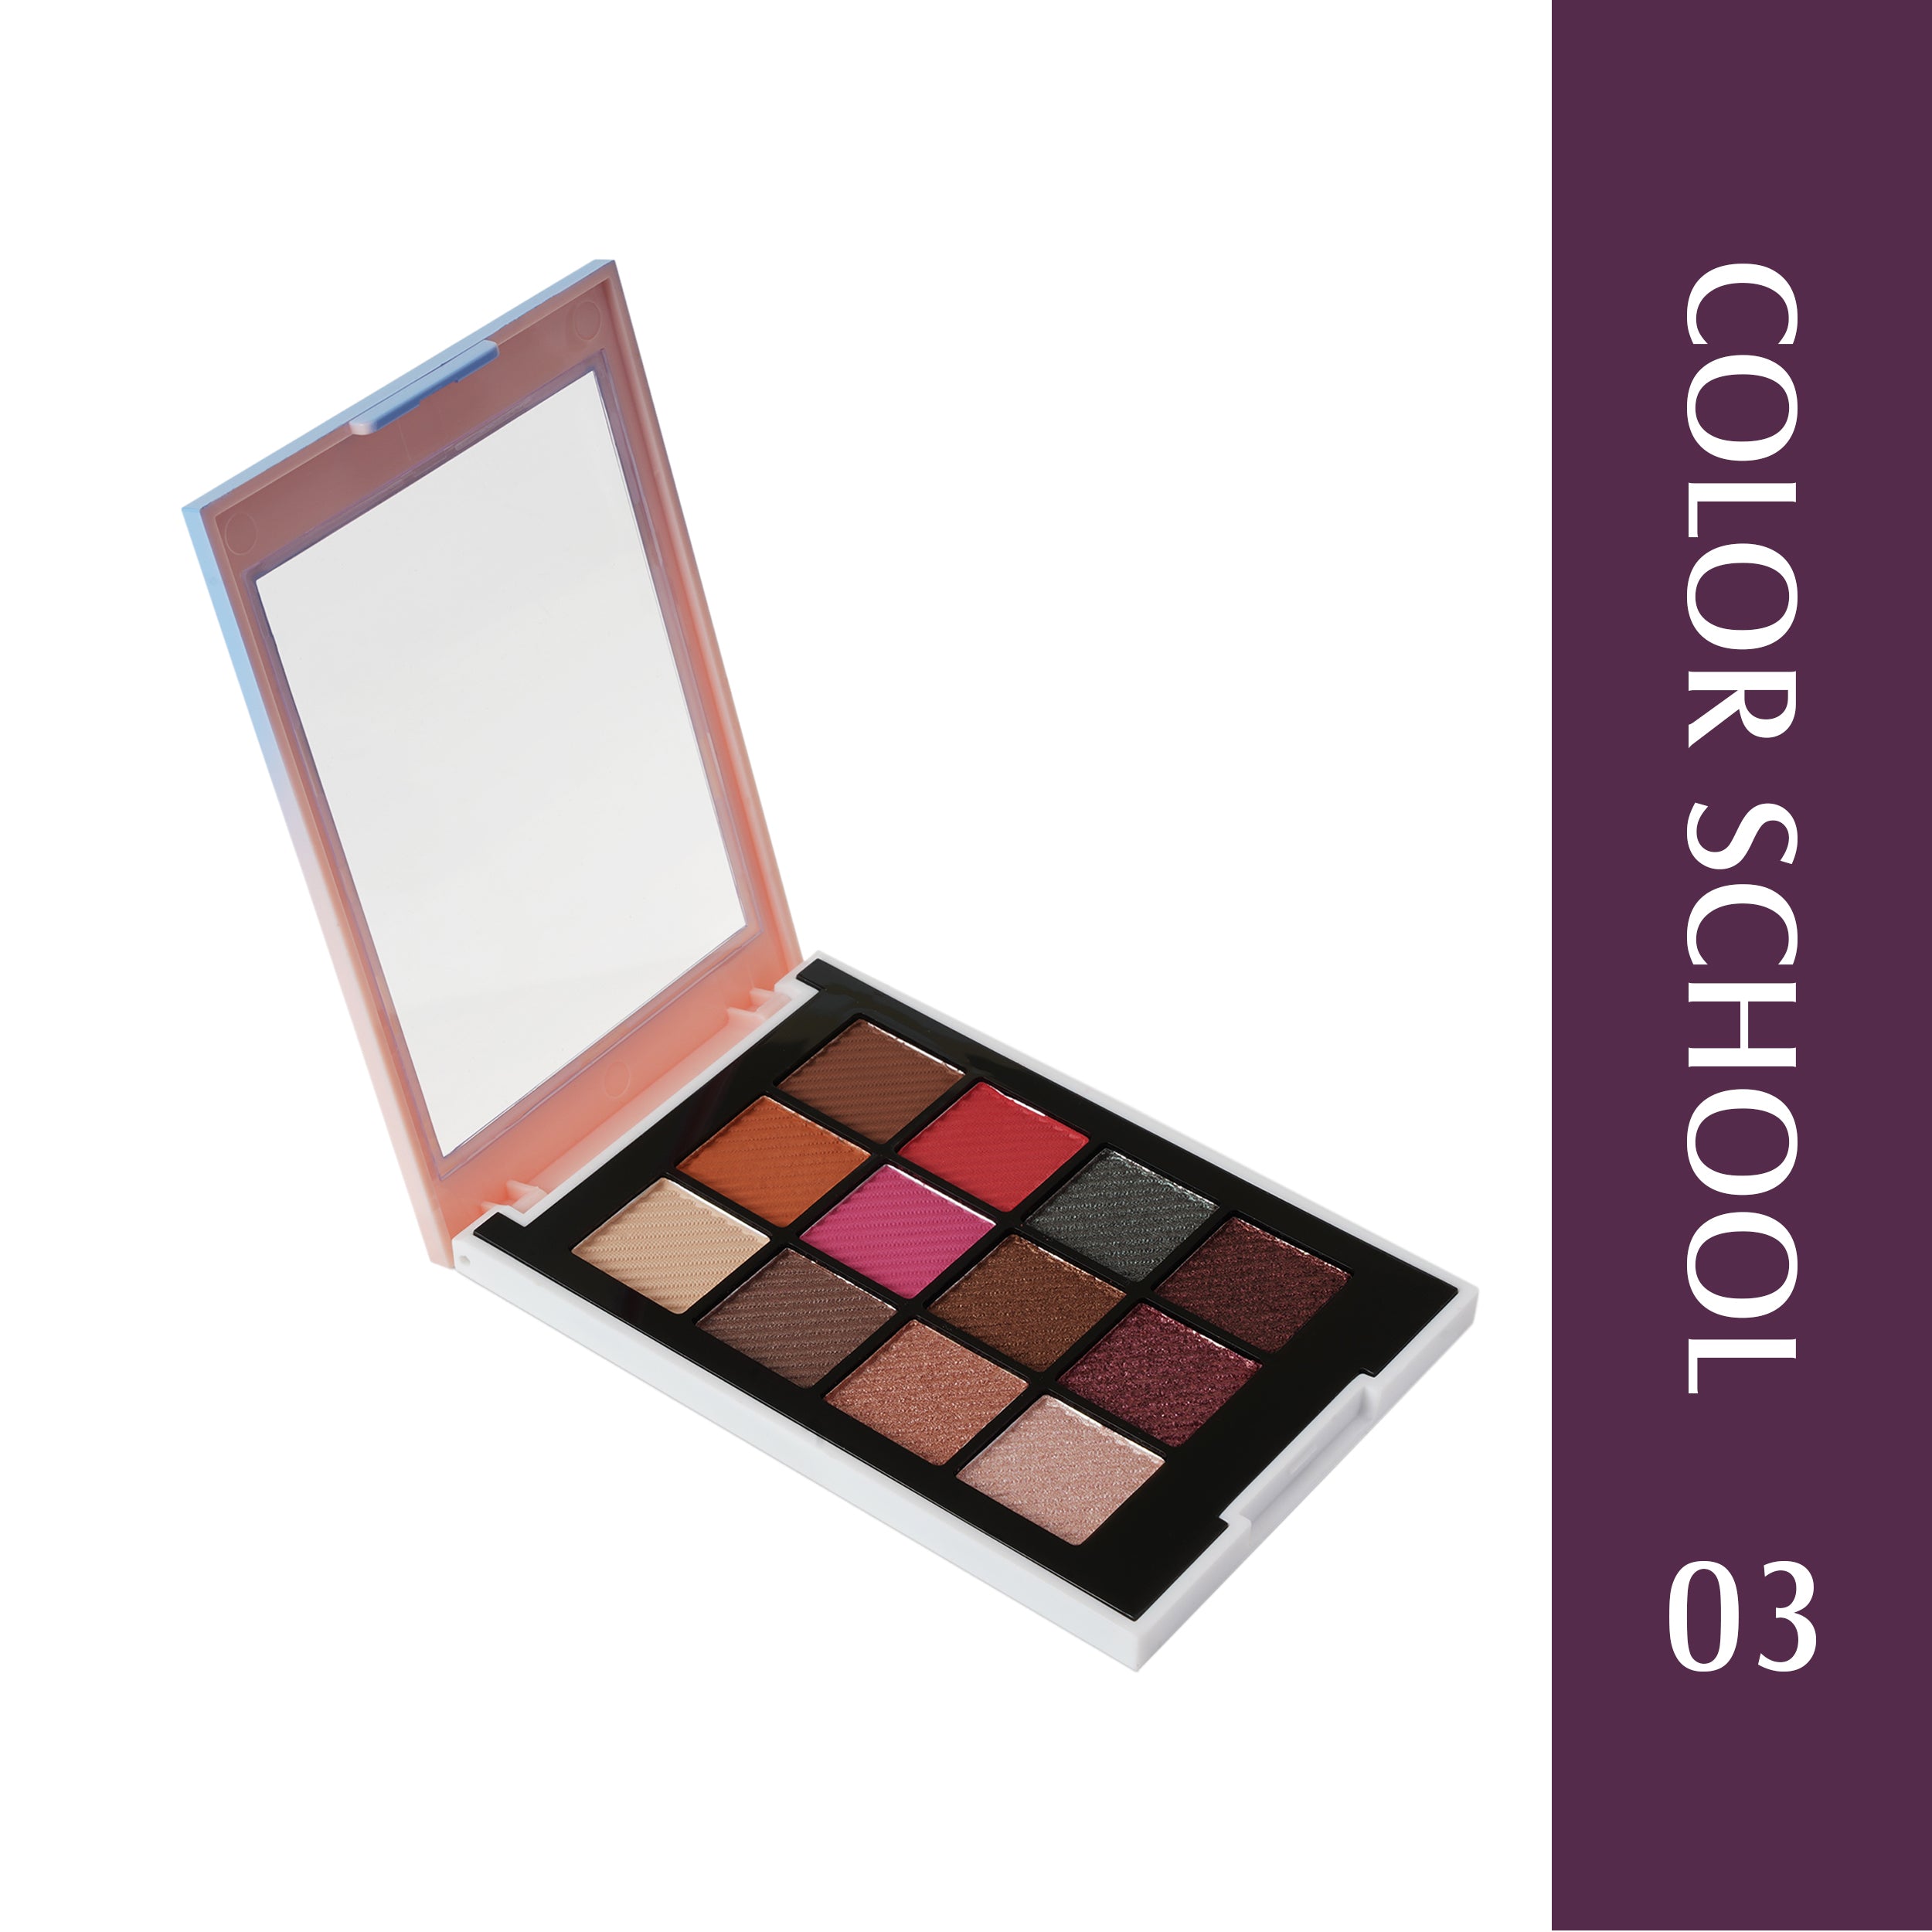 Glam21 Color School Eyeshadow Palette 12 Versatile Colors Long-Staying|Sparkles & Matte 10 g (Shade-03)